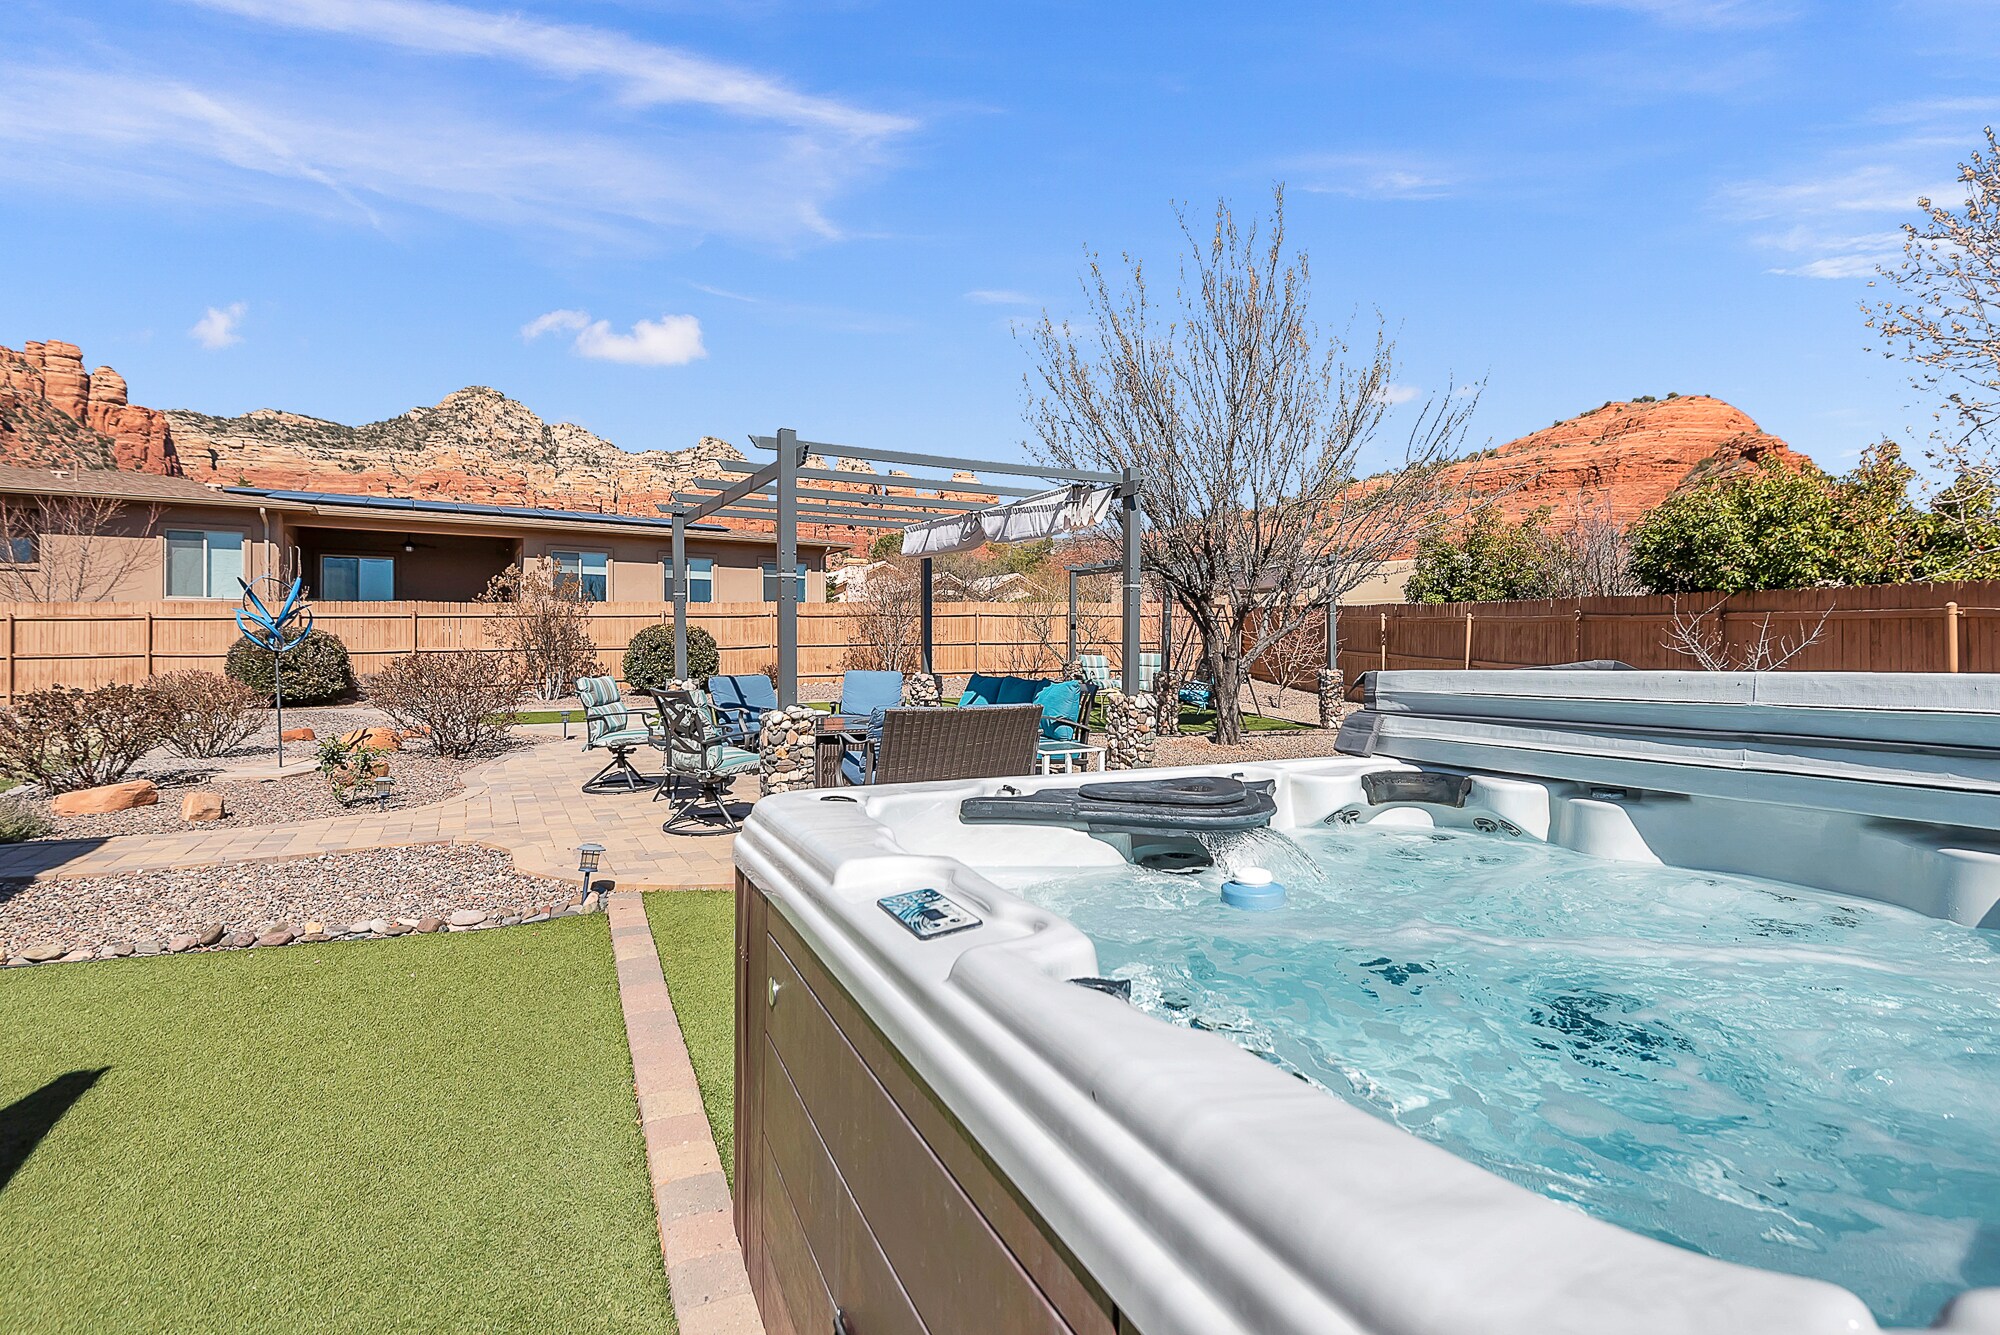 Private Backyard with a Soothing Hot Tub